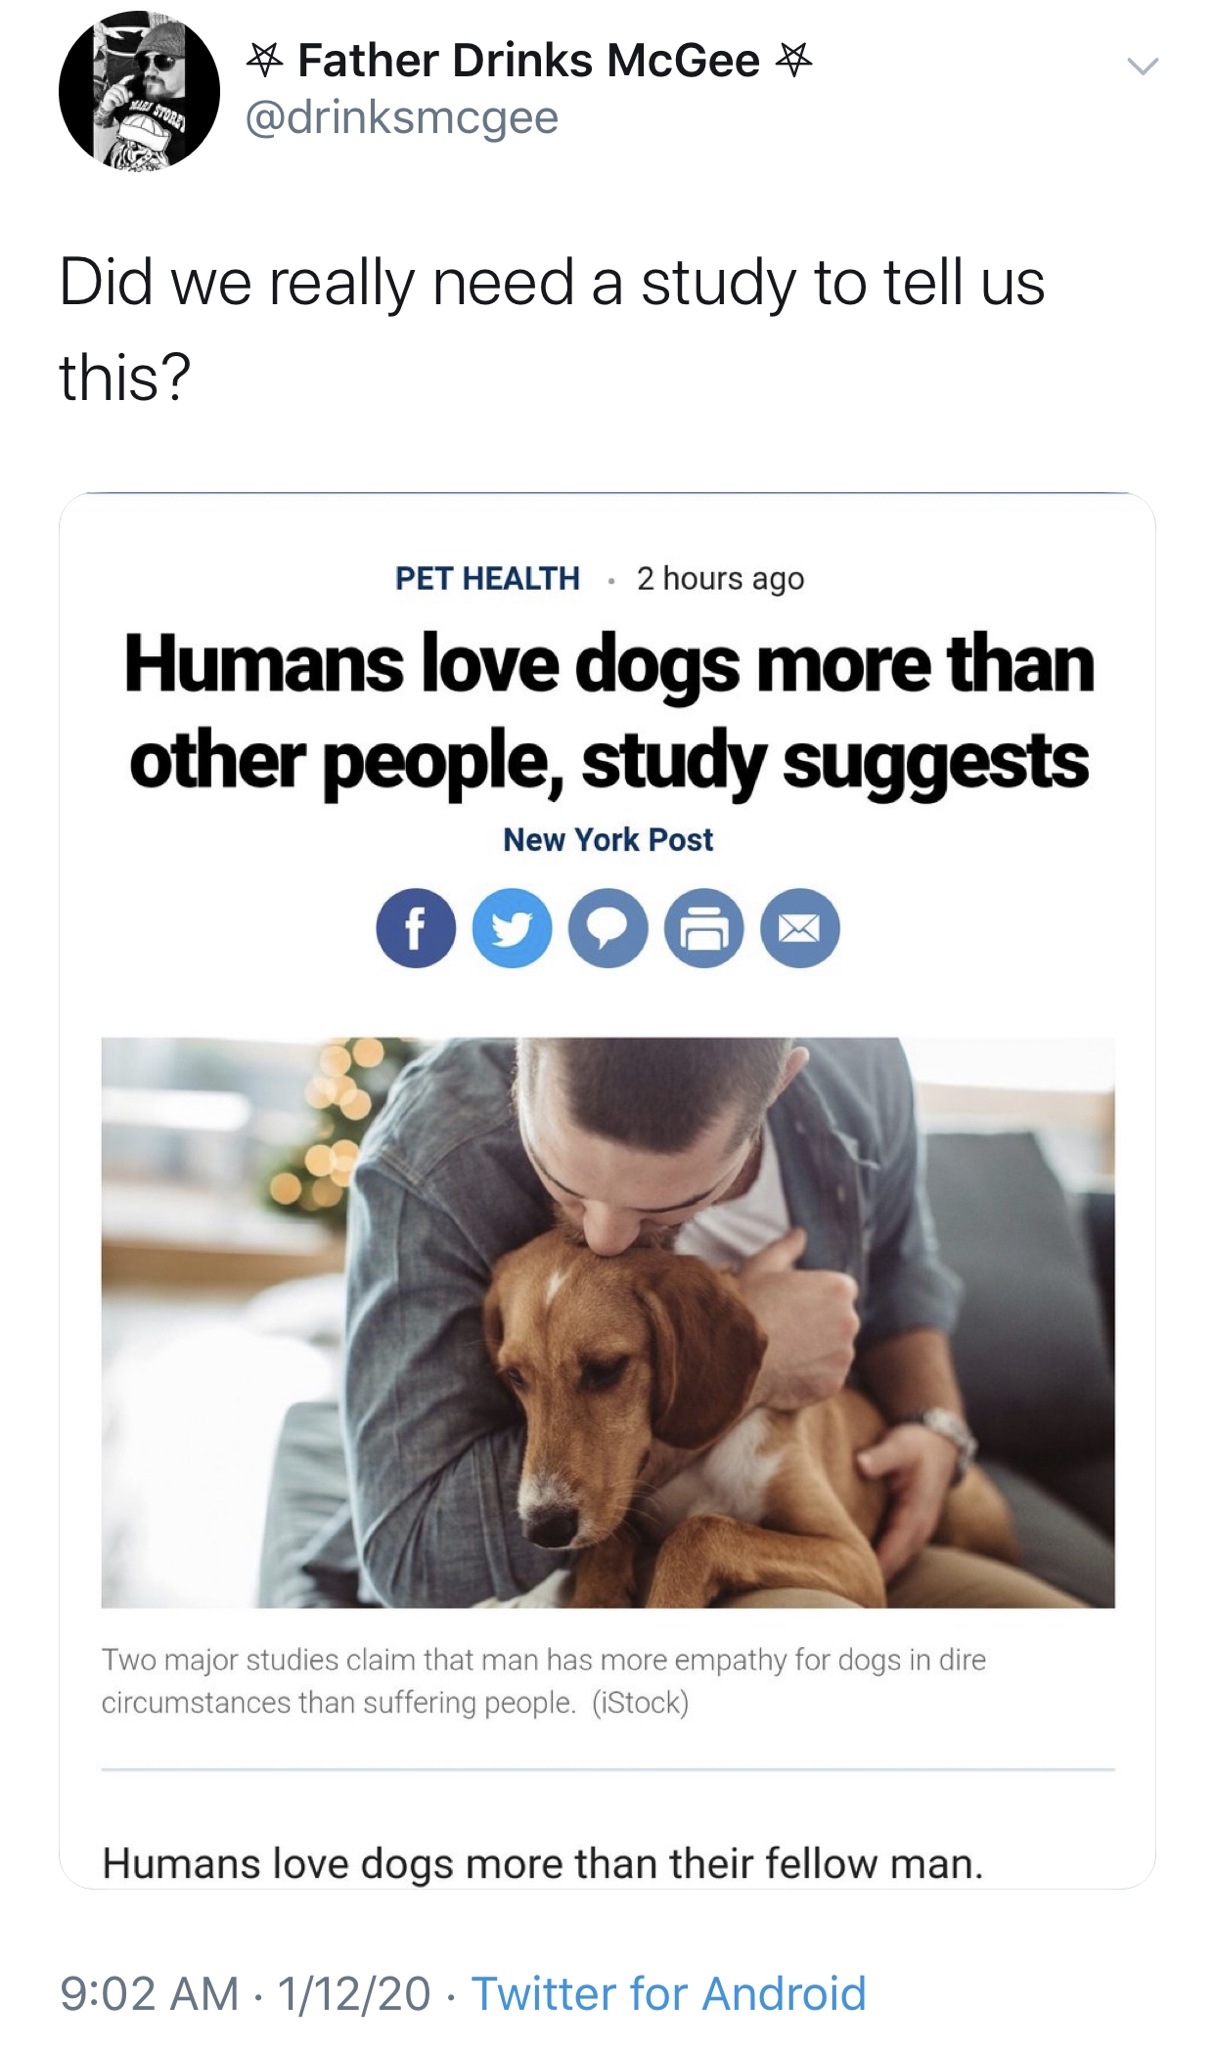 dog - Father Drinks McGee Stori Did we really need a study to tell us this? Pet Health 2 hours ago Humans love dogs more than other people, study suggests 00000 New York Post Two major studies claim that man has more empathy for dogs in dire circumstances